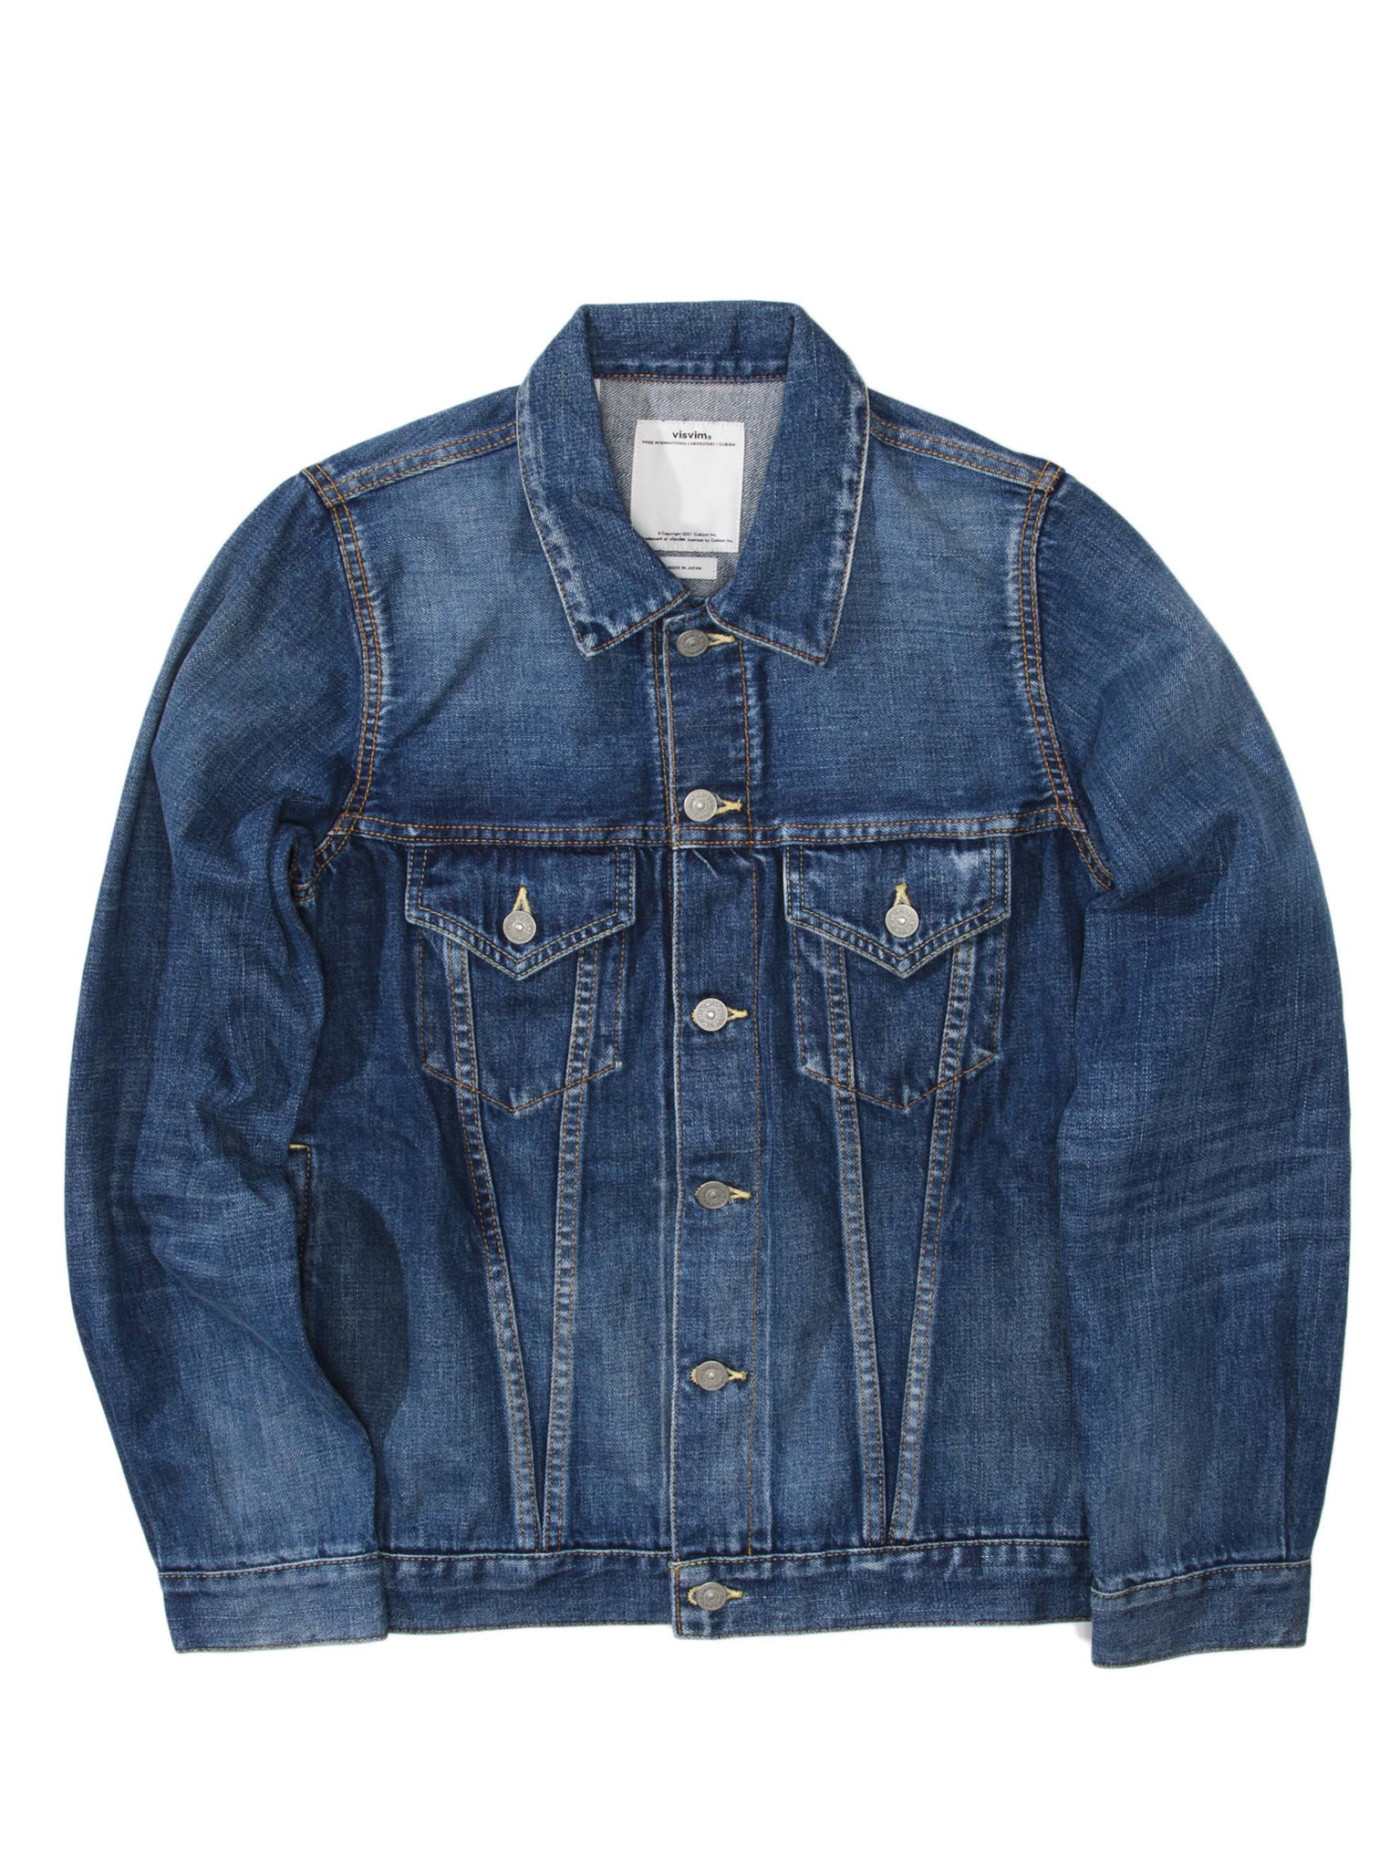 The Cool Thing About Thousand Dollar Jean Jackets | Complex